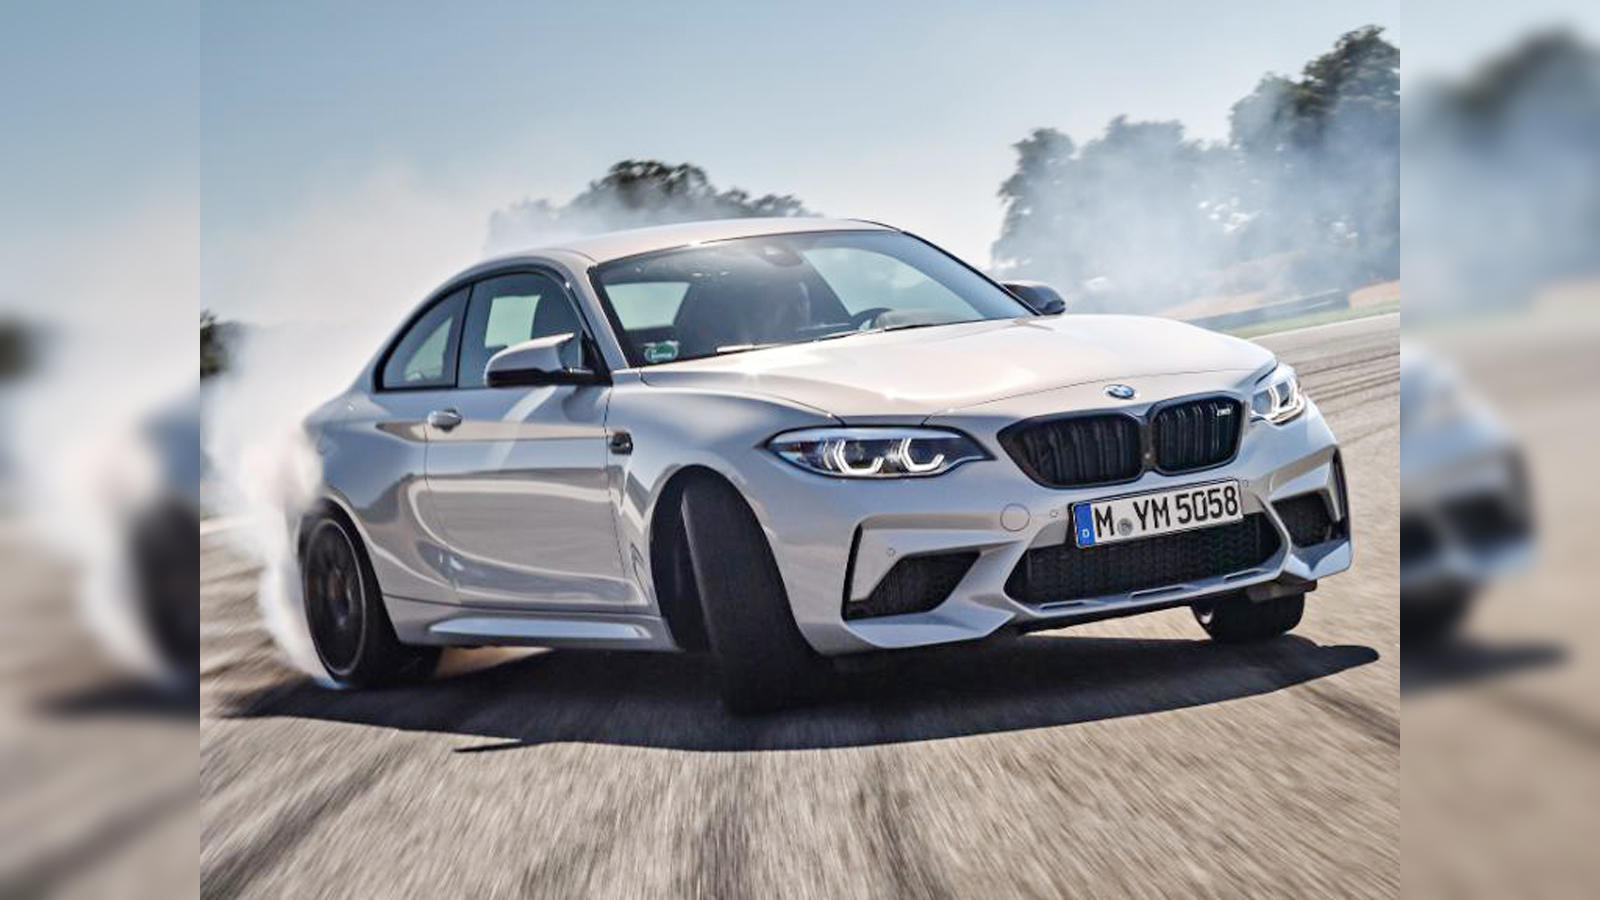 The all-new BMW M2